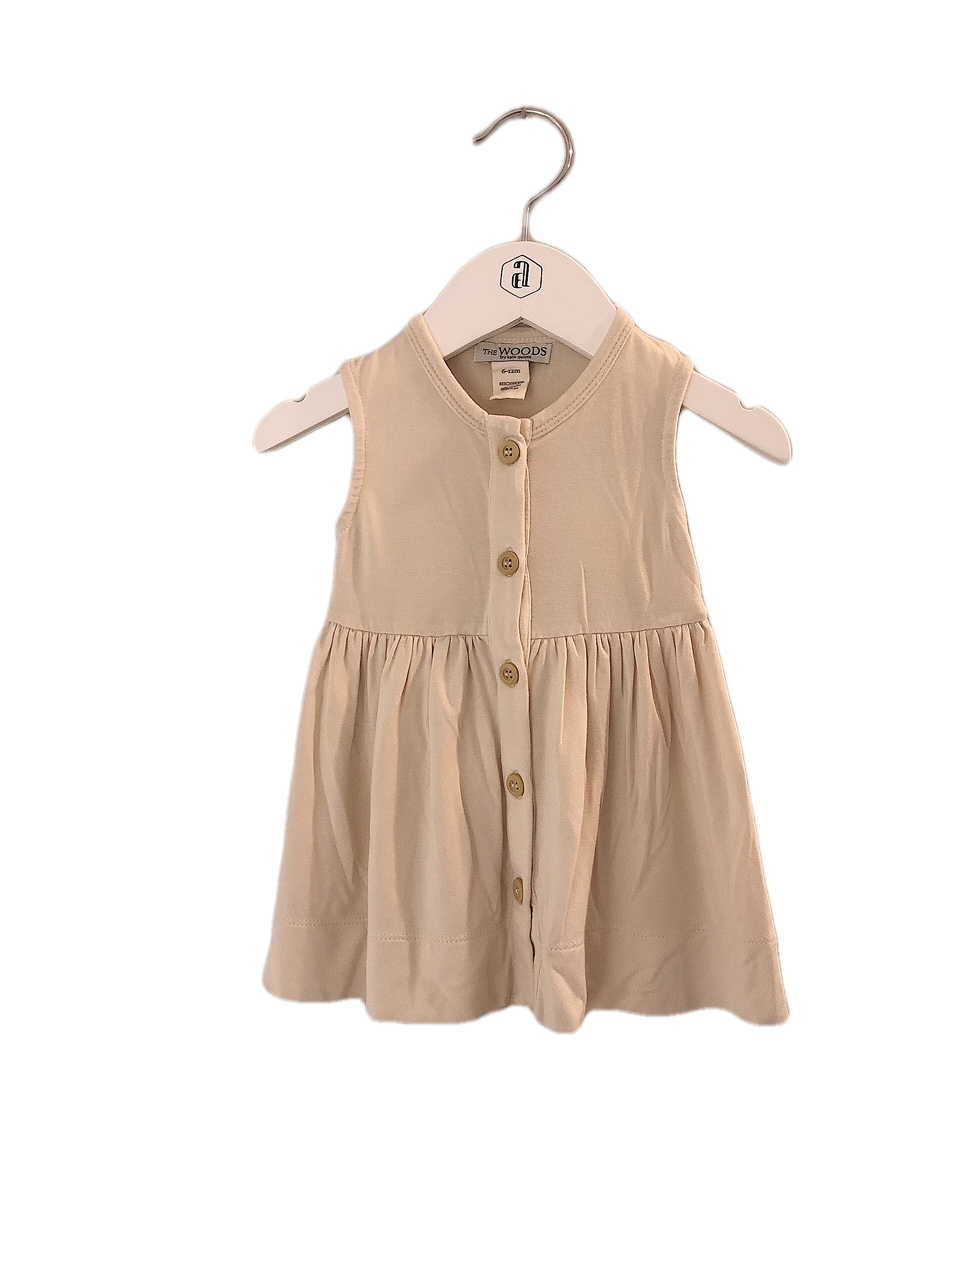 THE WOODS BY KATE QUIN DRESS (SZ 6-12M)